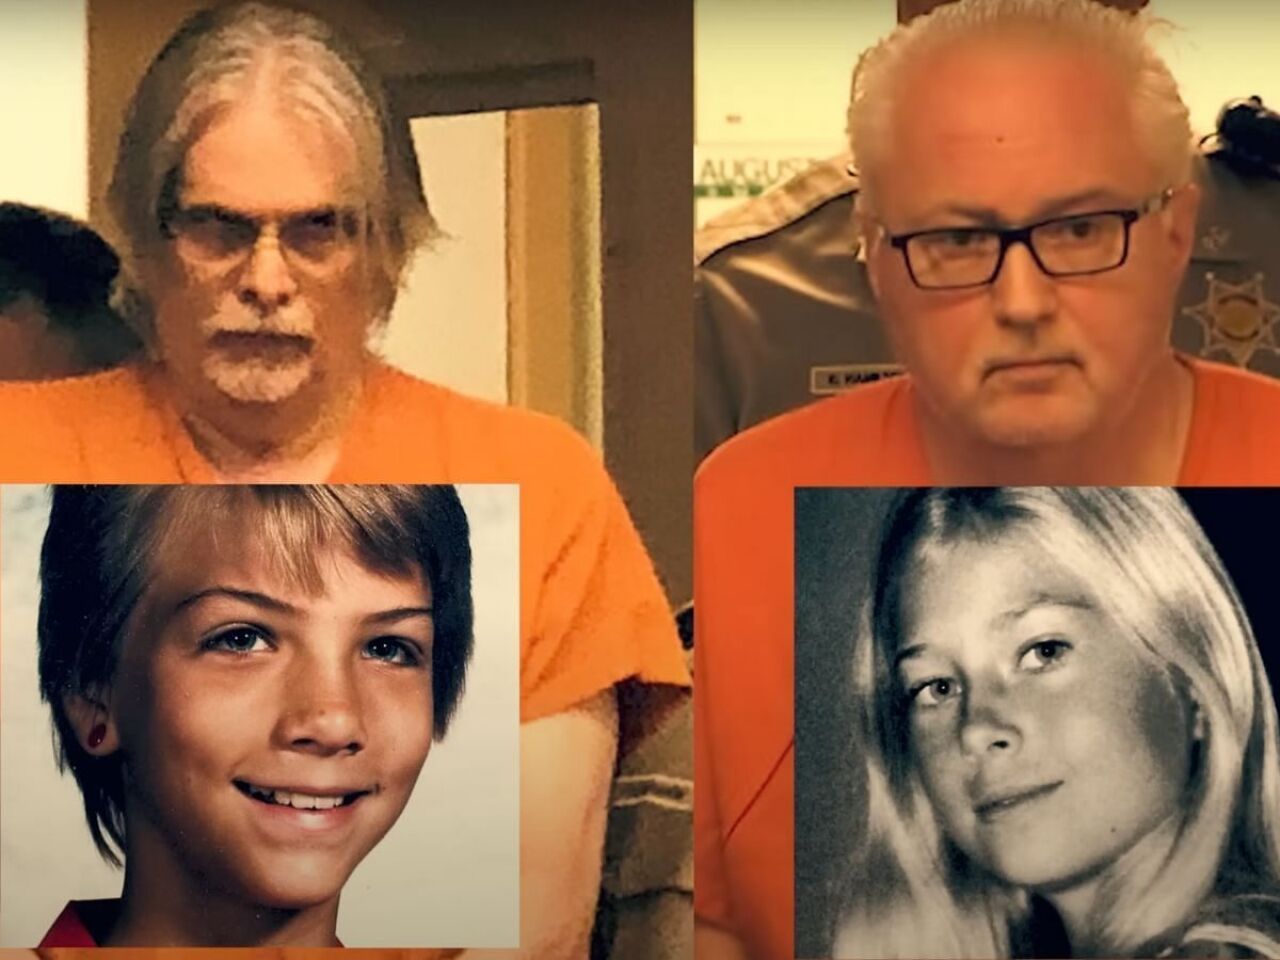 [IMAGE] 4 key details about Michella Welch and Jennifer Bastian's murders